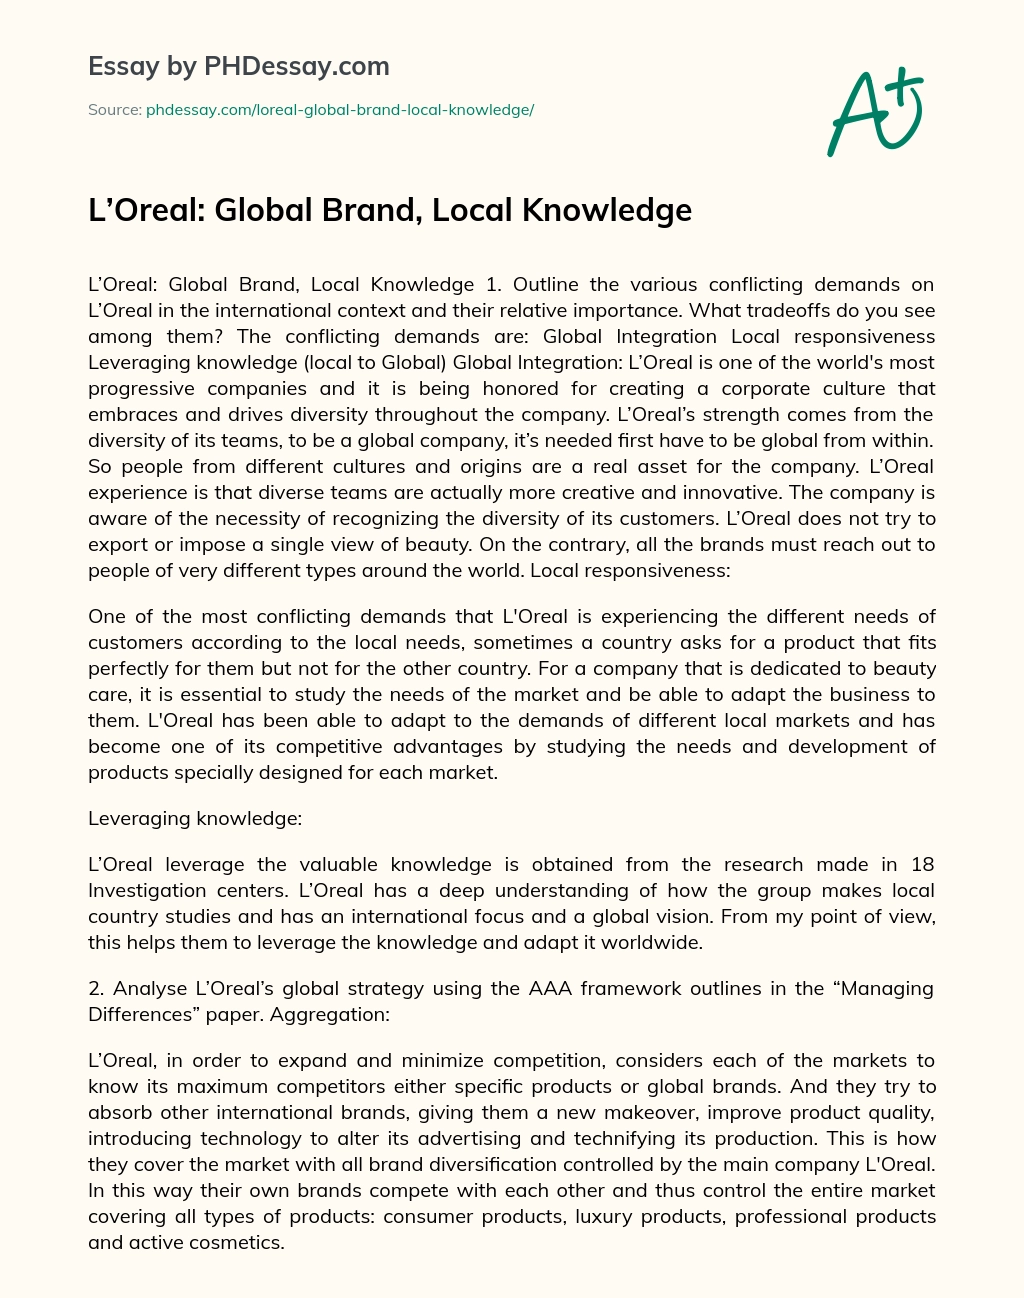 L’Oreal: Global Brand, Local Knowledge essay